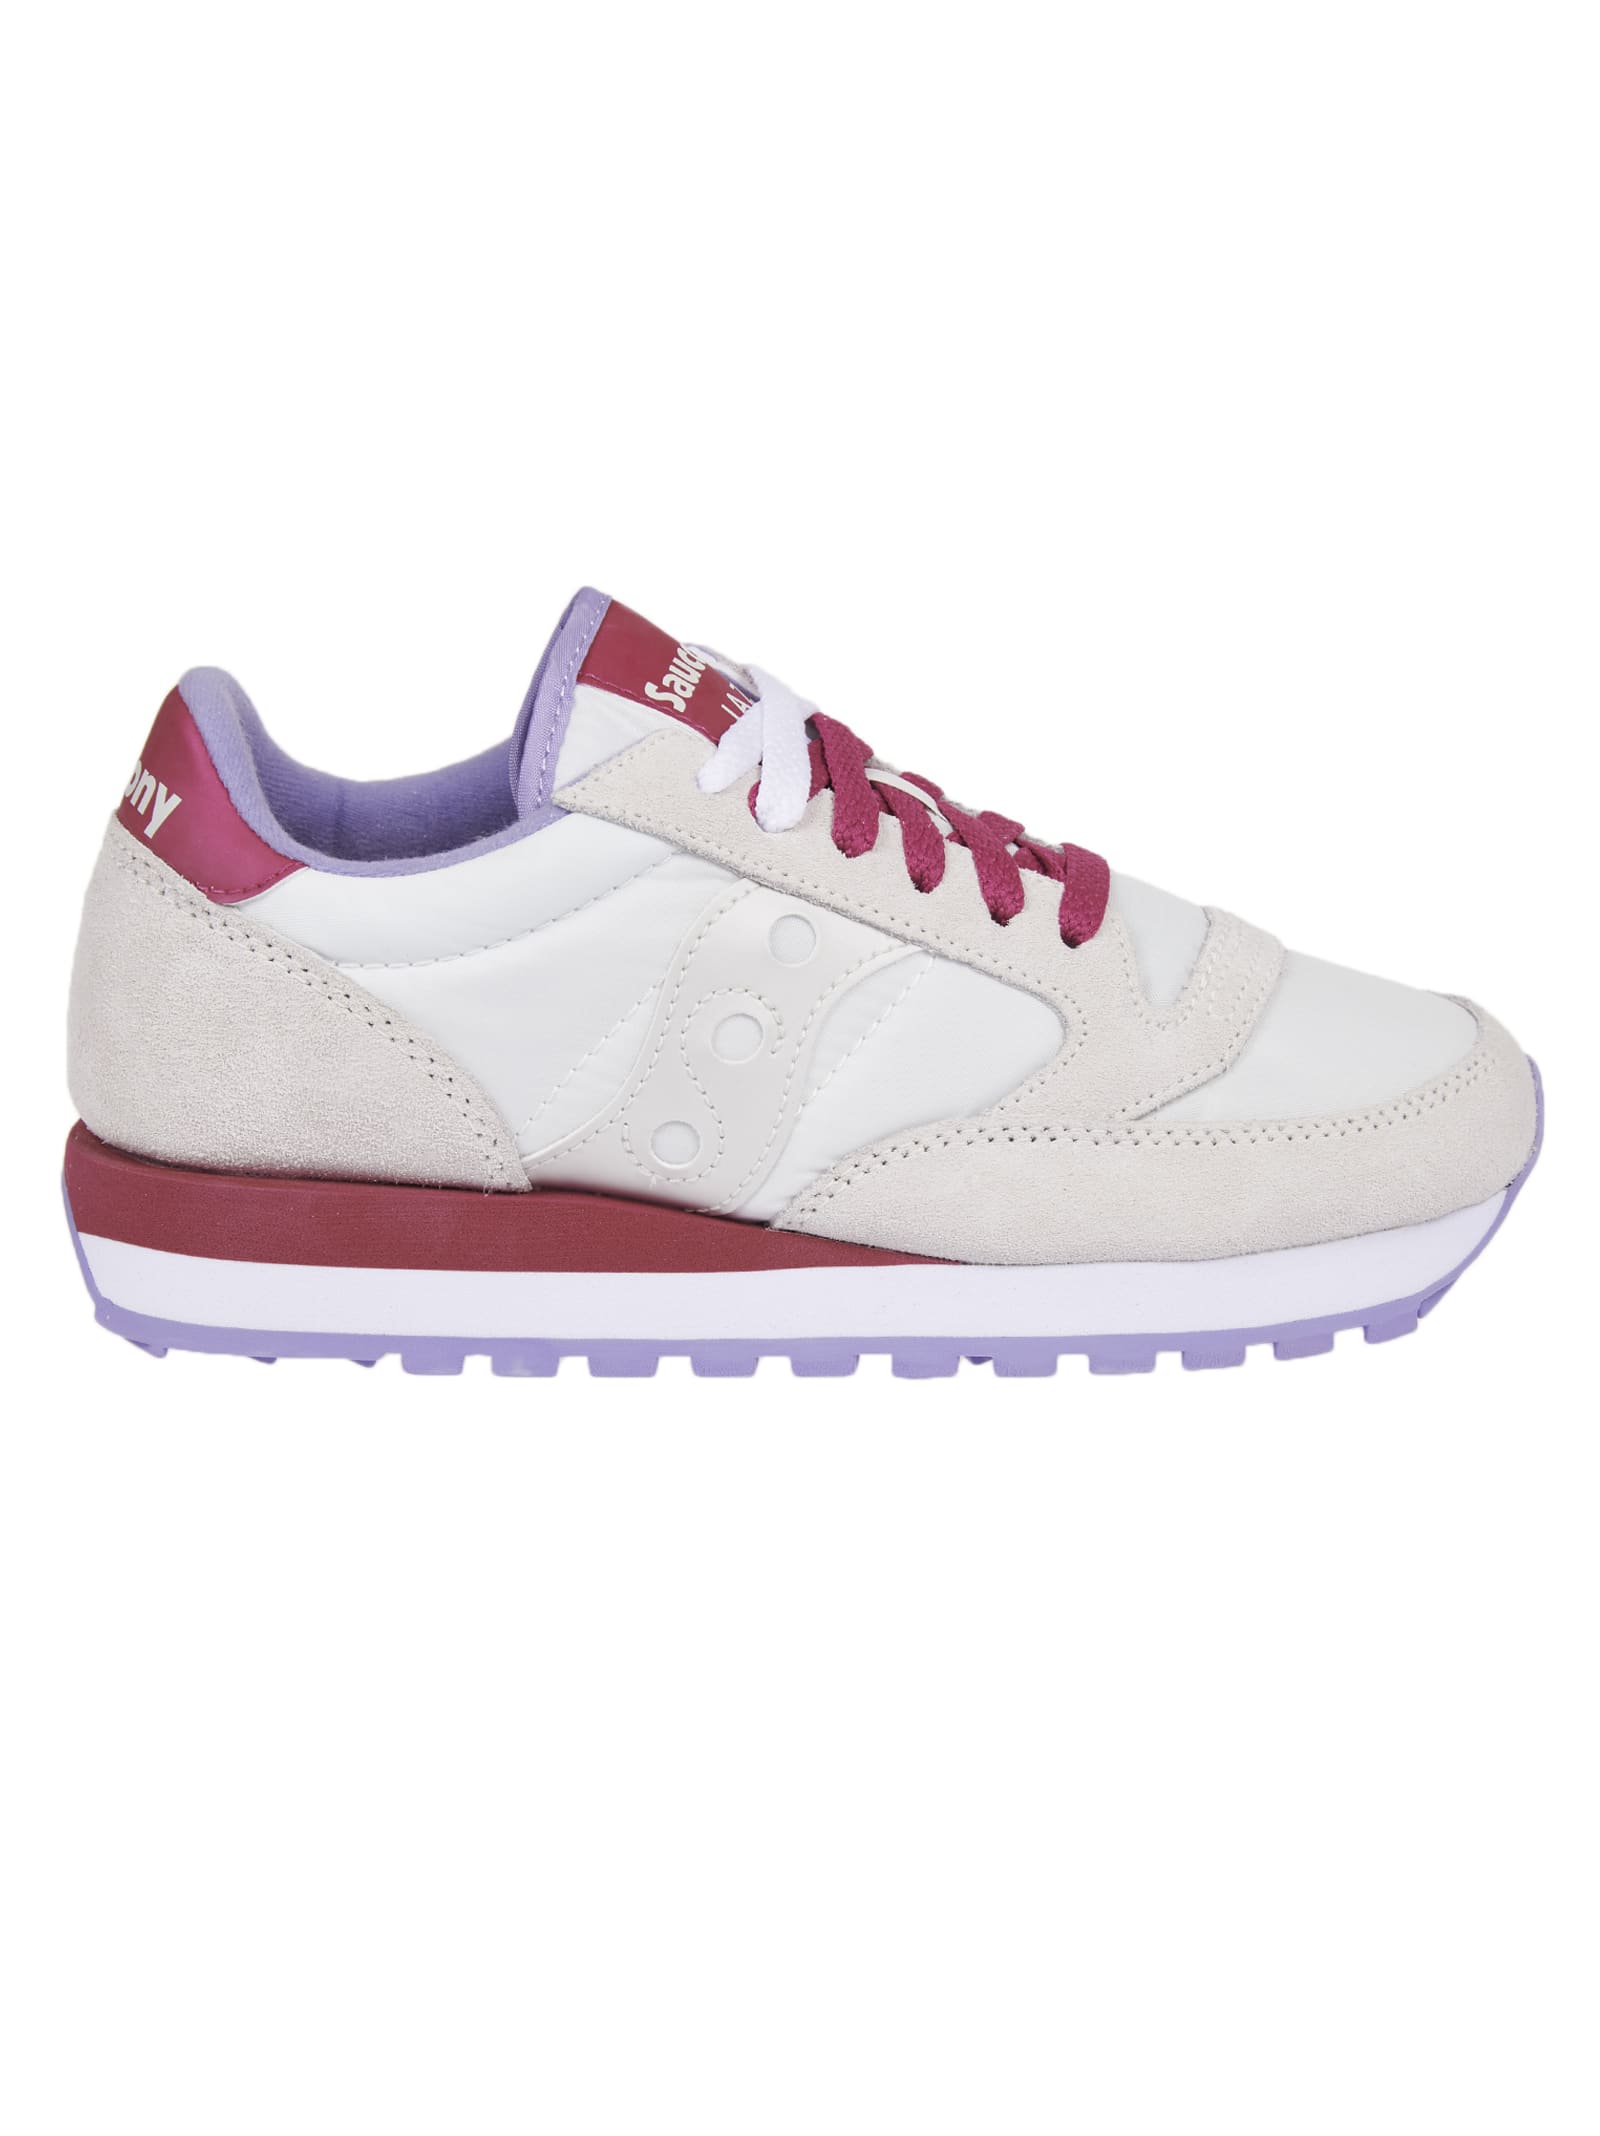 SAUCONY WHITE AND BERRY JAZZ ORIGINAL SNEAKERS,11239520